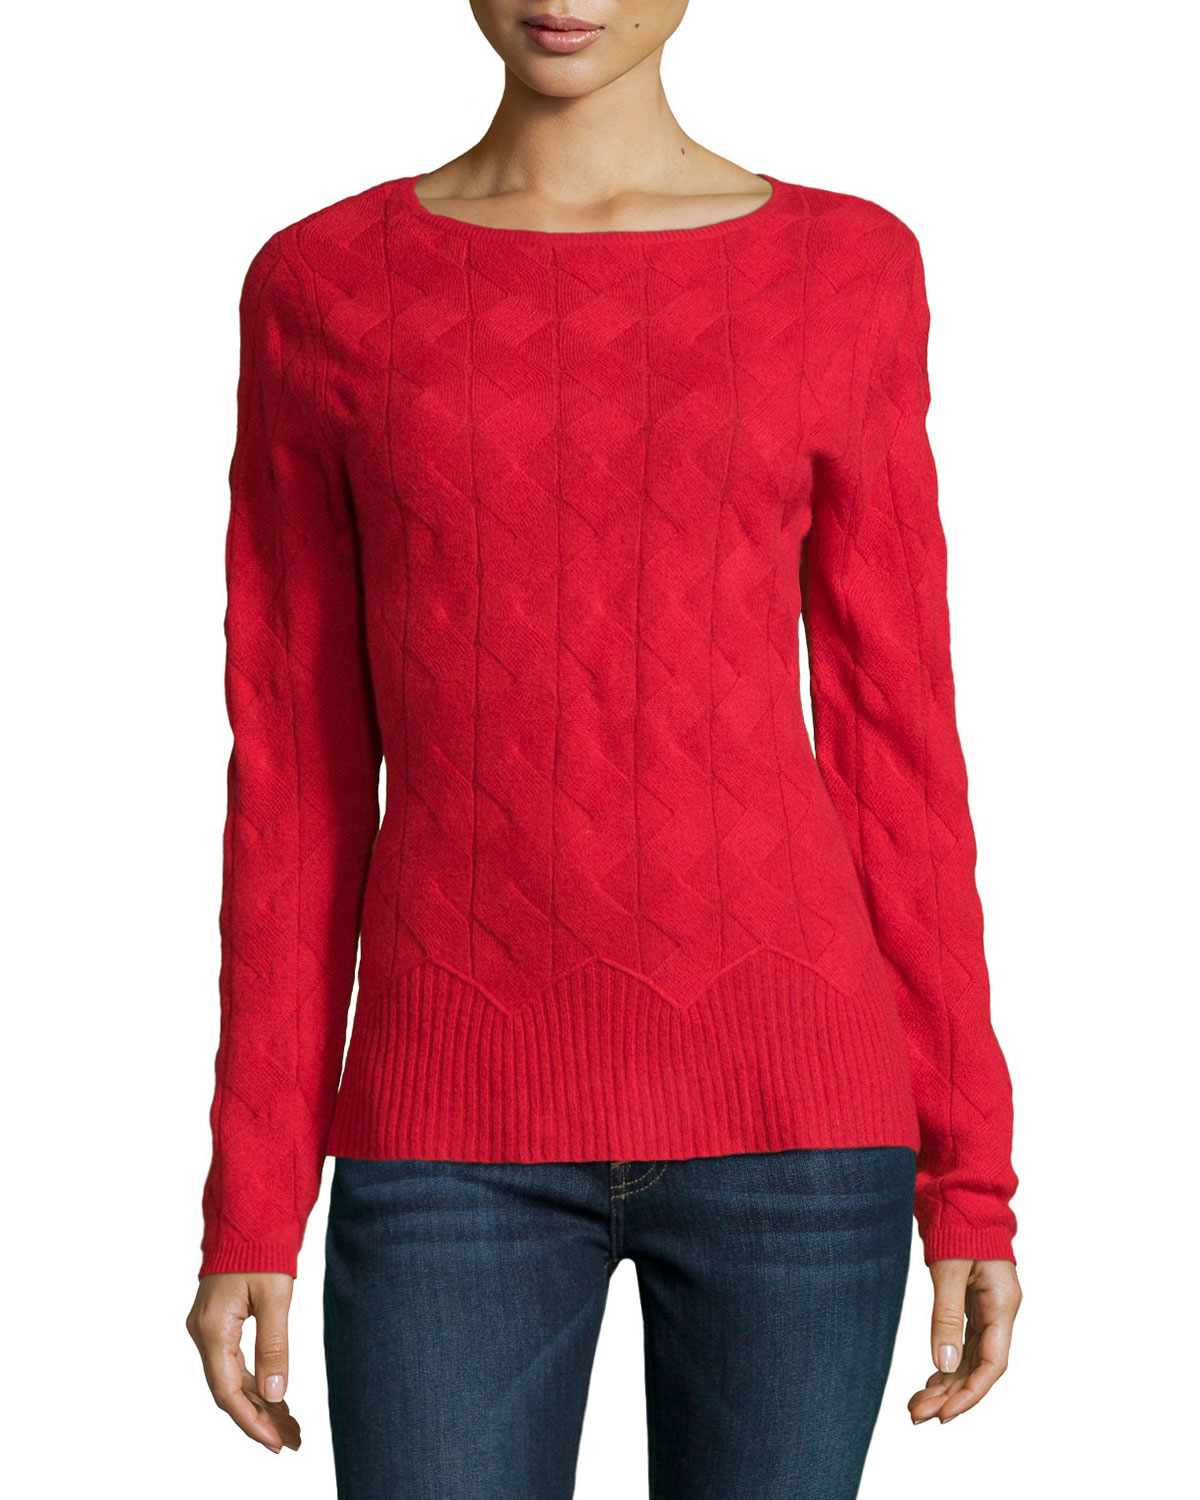 Lyst - Neiman marcus Cable-knit Cashmere Sweater in Green